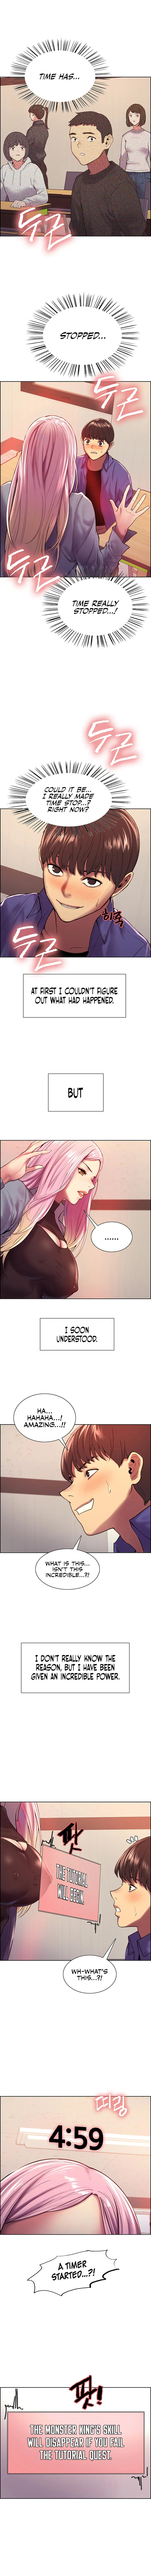 Sex Stopwatch - Chapter 2 Page 2